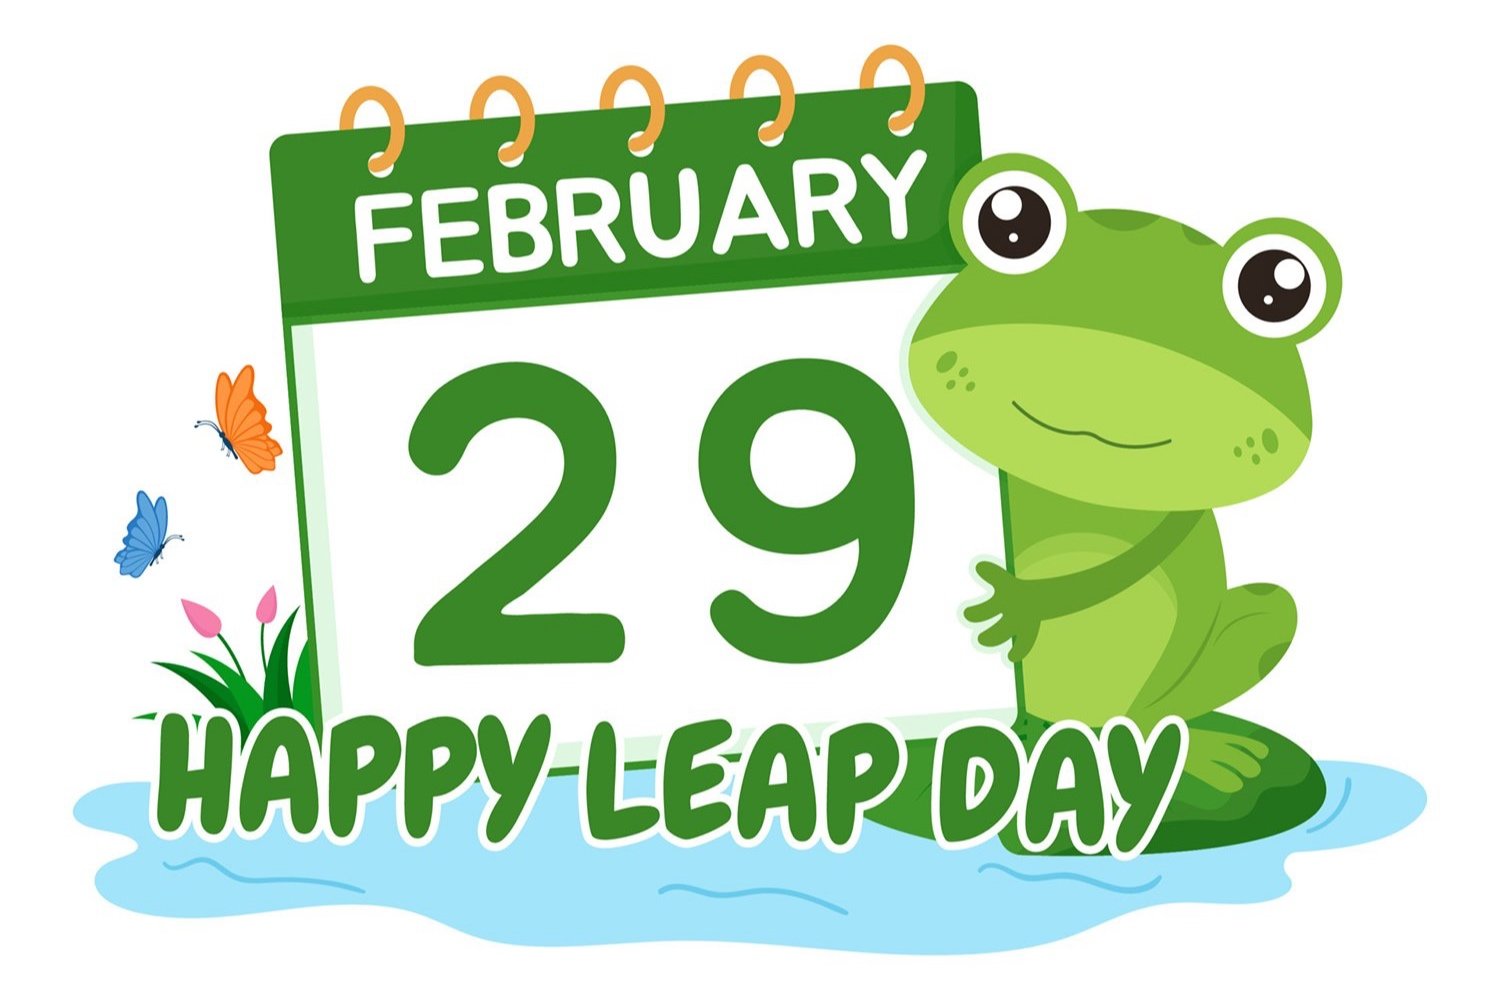 vecteezy_happy-leap-day-on-29-february-with-cute-frog-in-flat-style_15449916.jpg